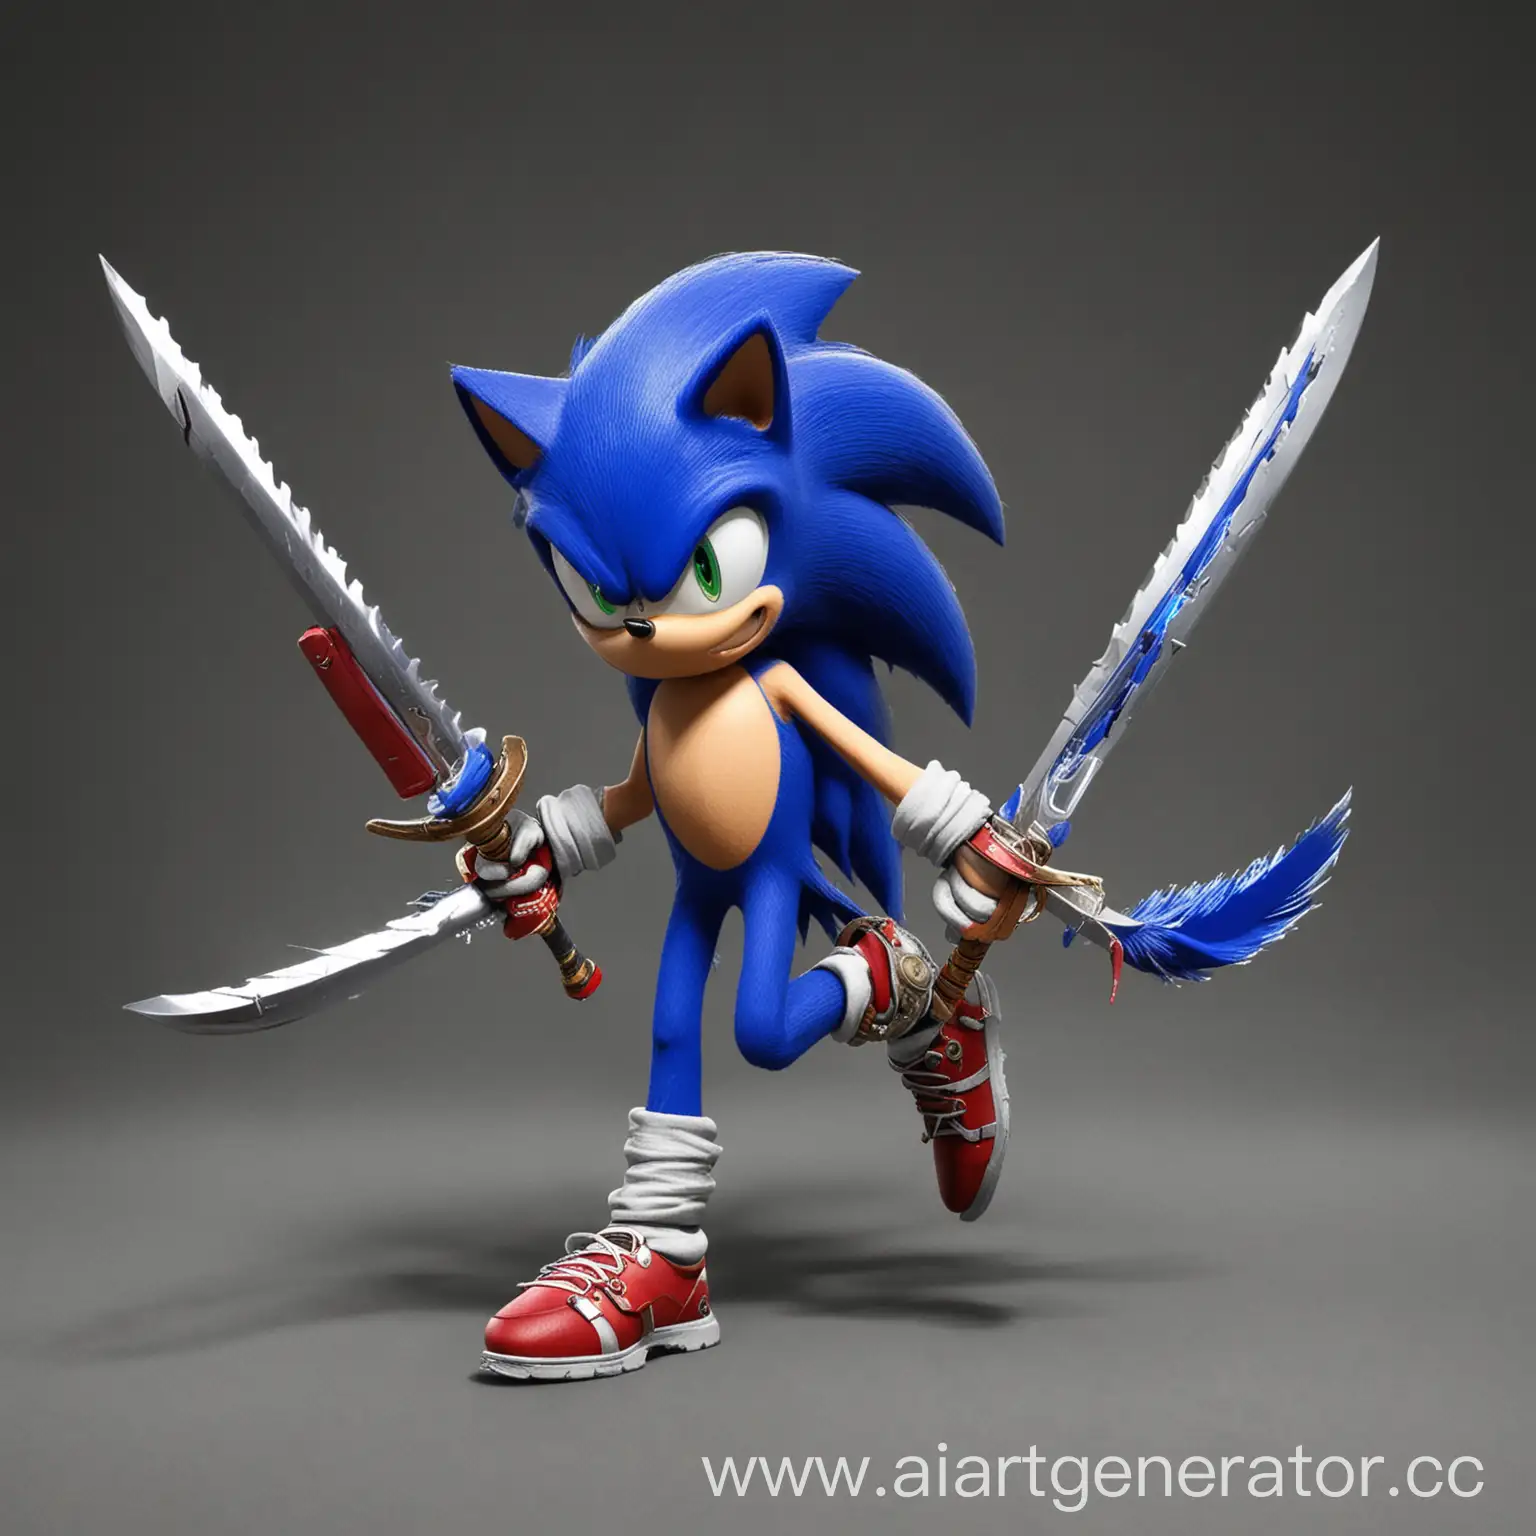 Sonic-Assassin-with-Swords-in-Action